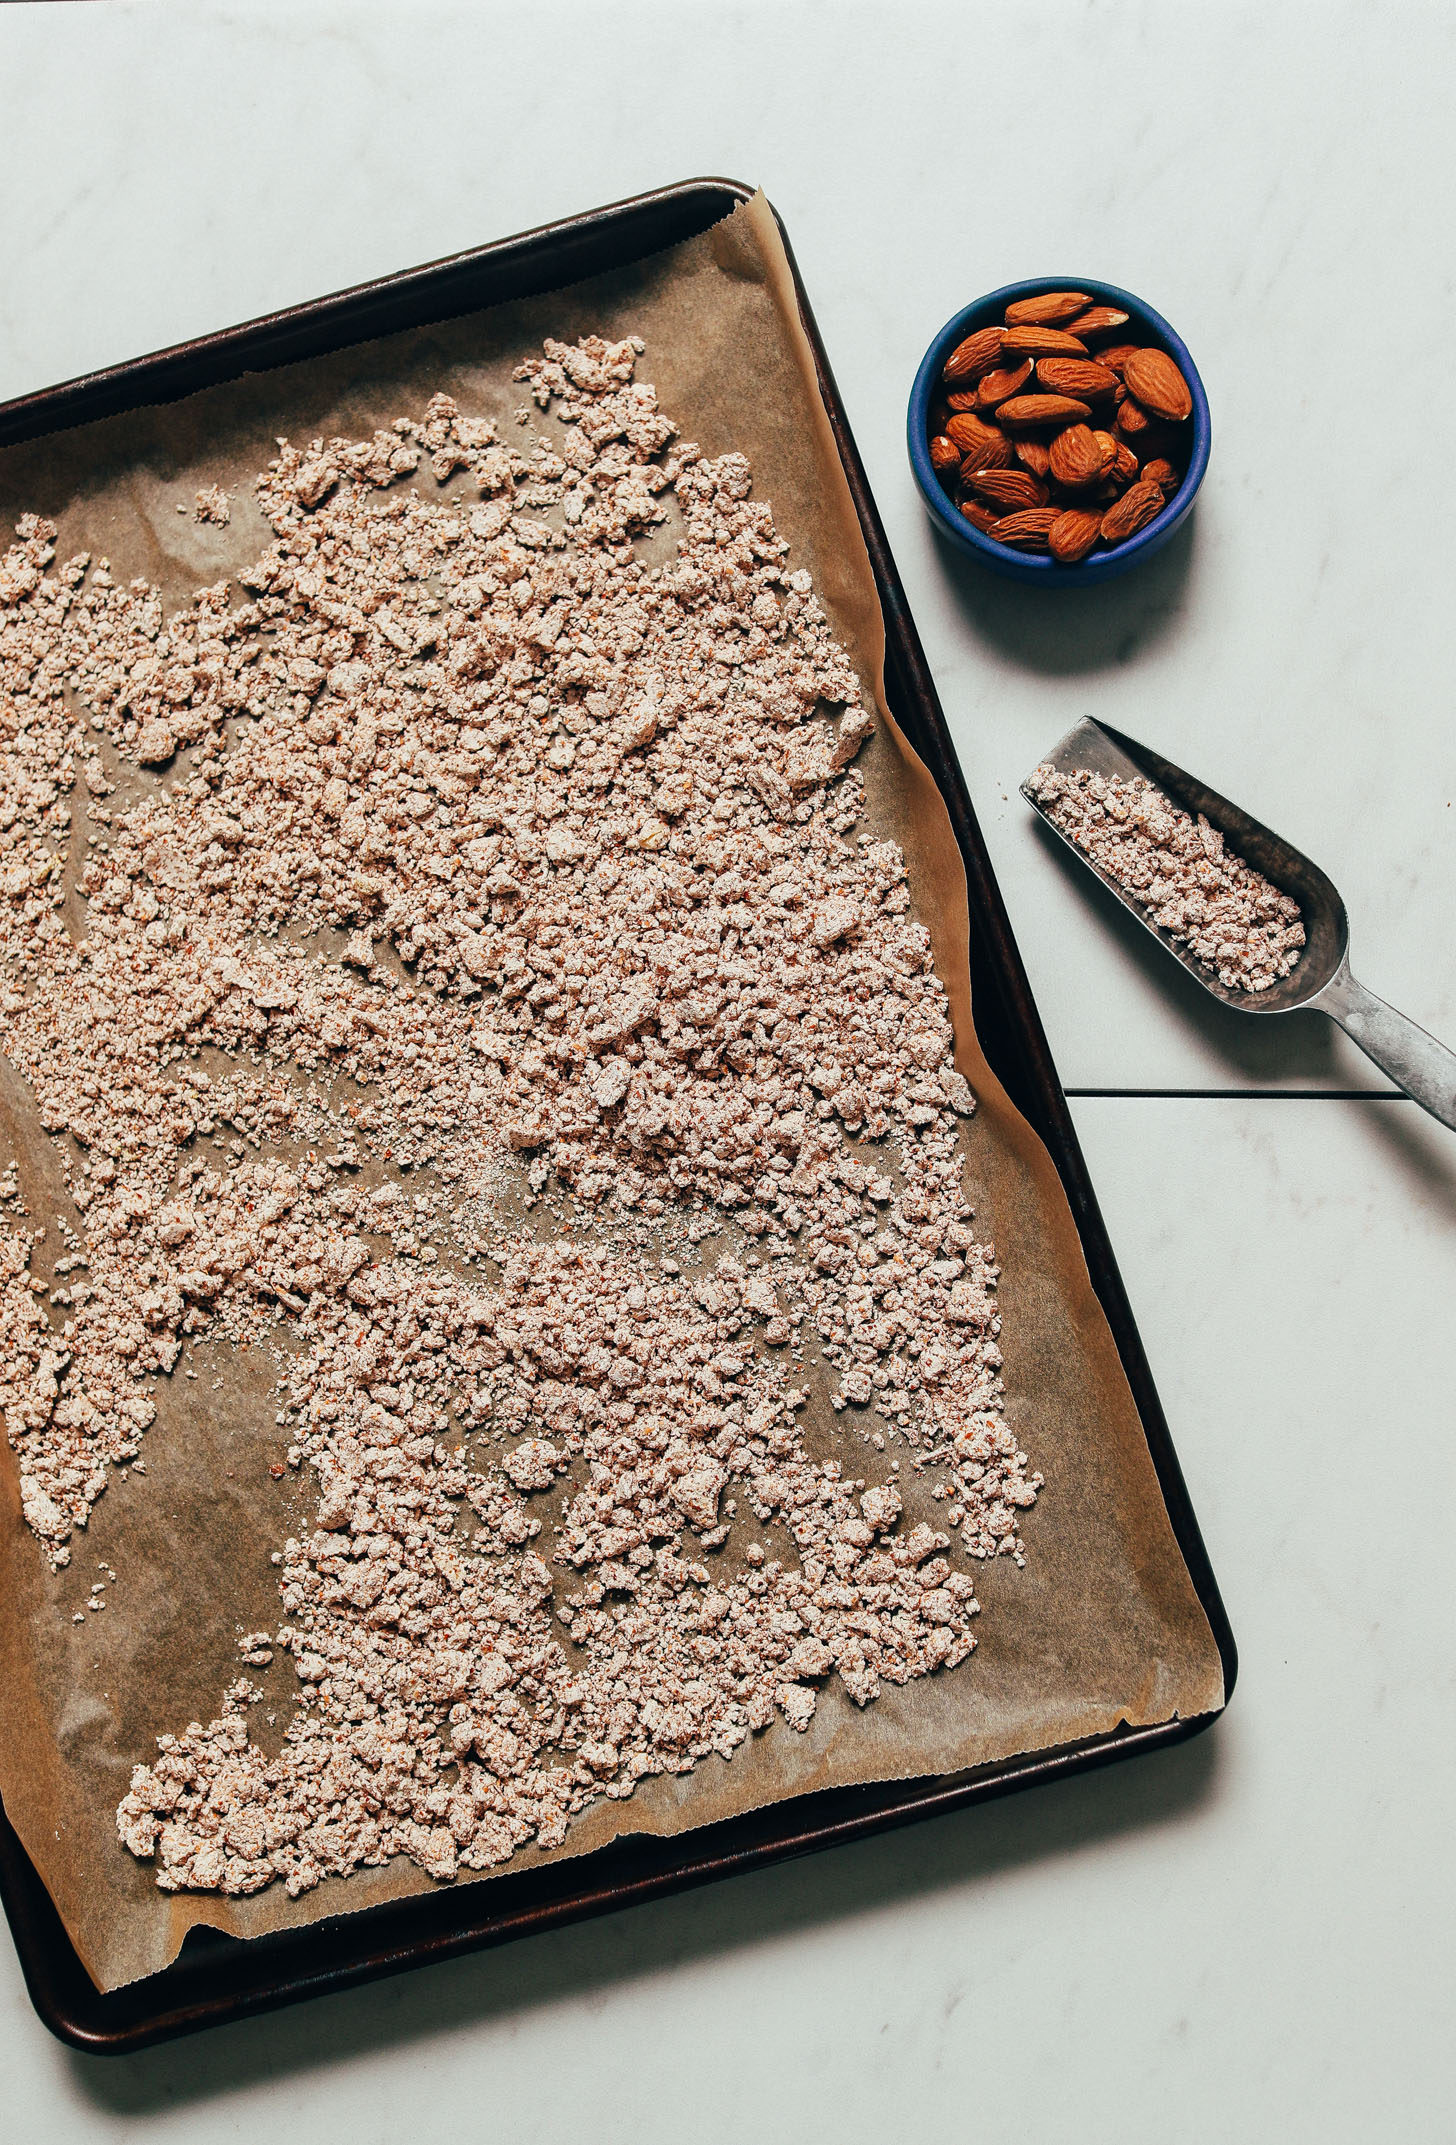 Parchment-lined baking sheet filled with dried almond pulp for making homemade almond meal from almond pulp